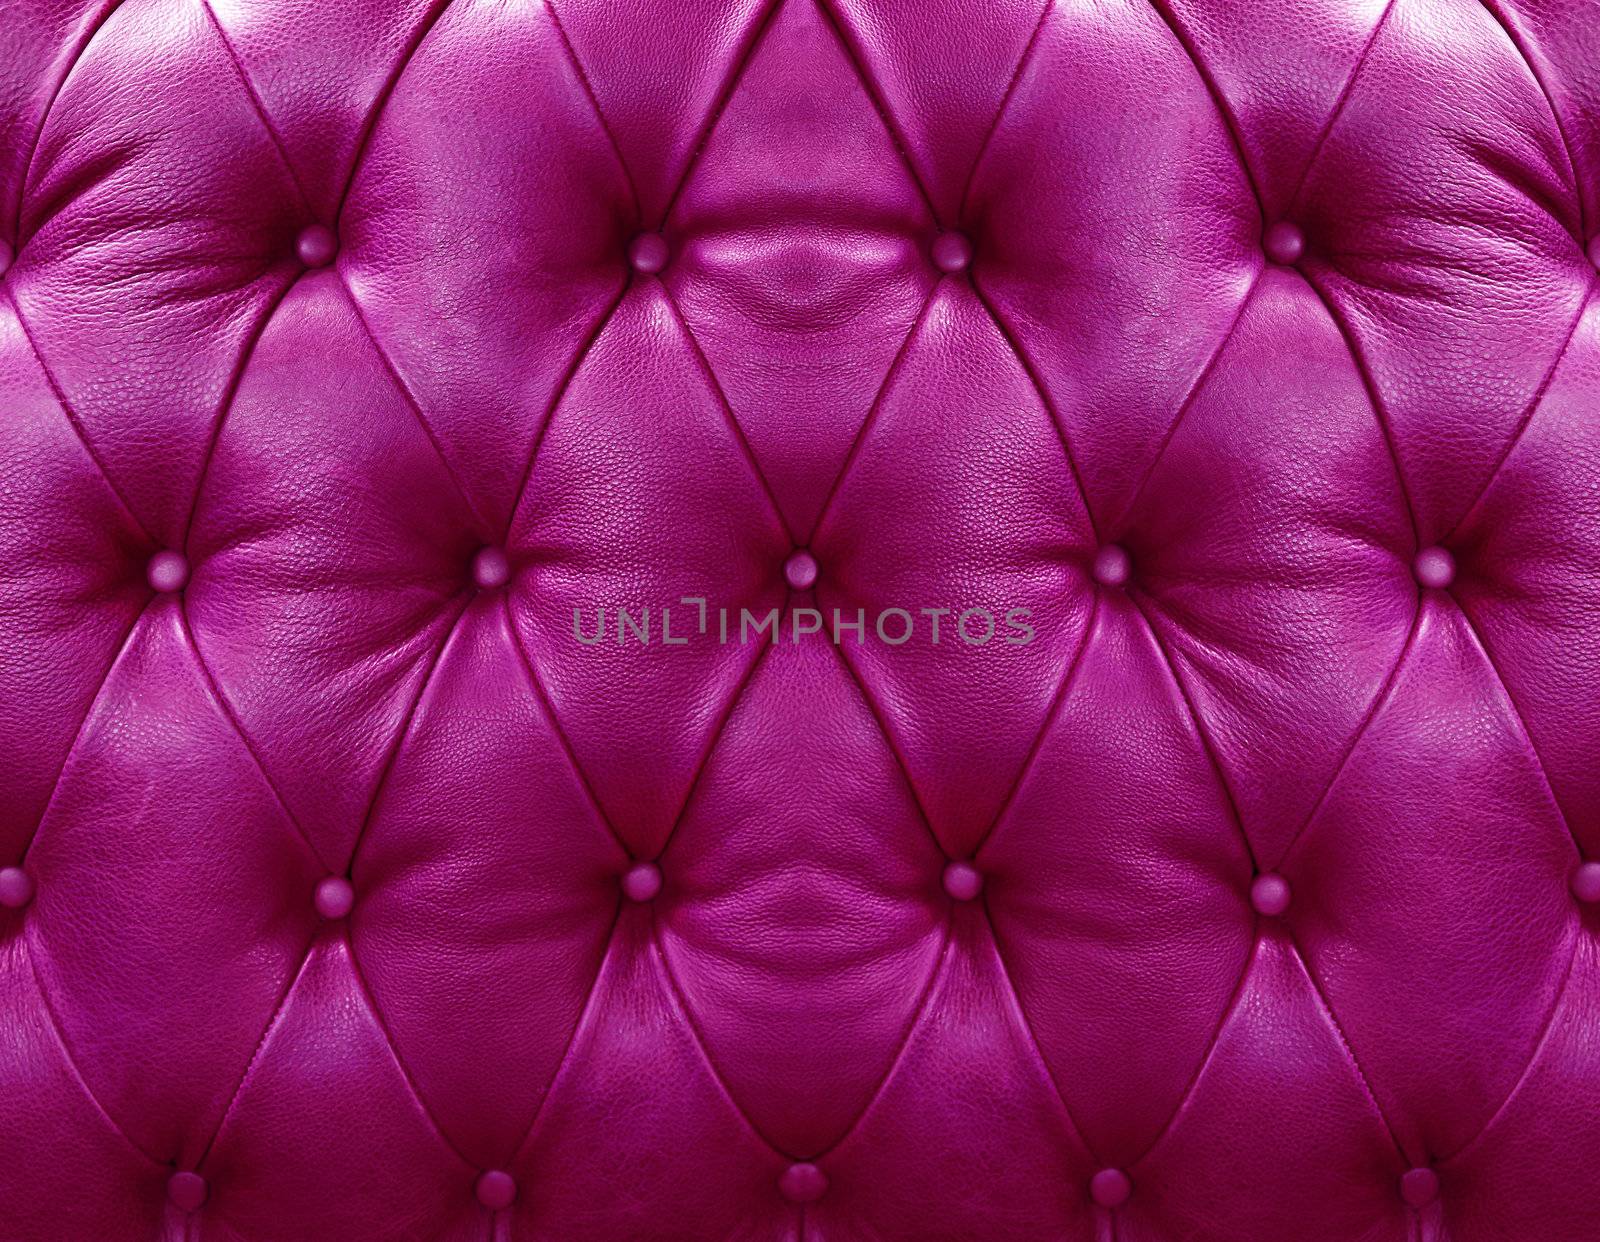 Pink upholstery leather  by stoonn